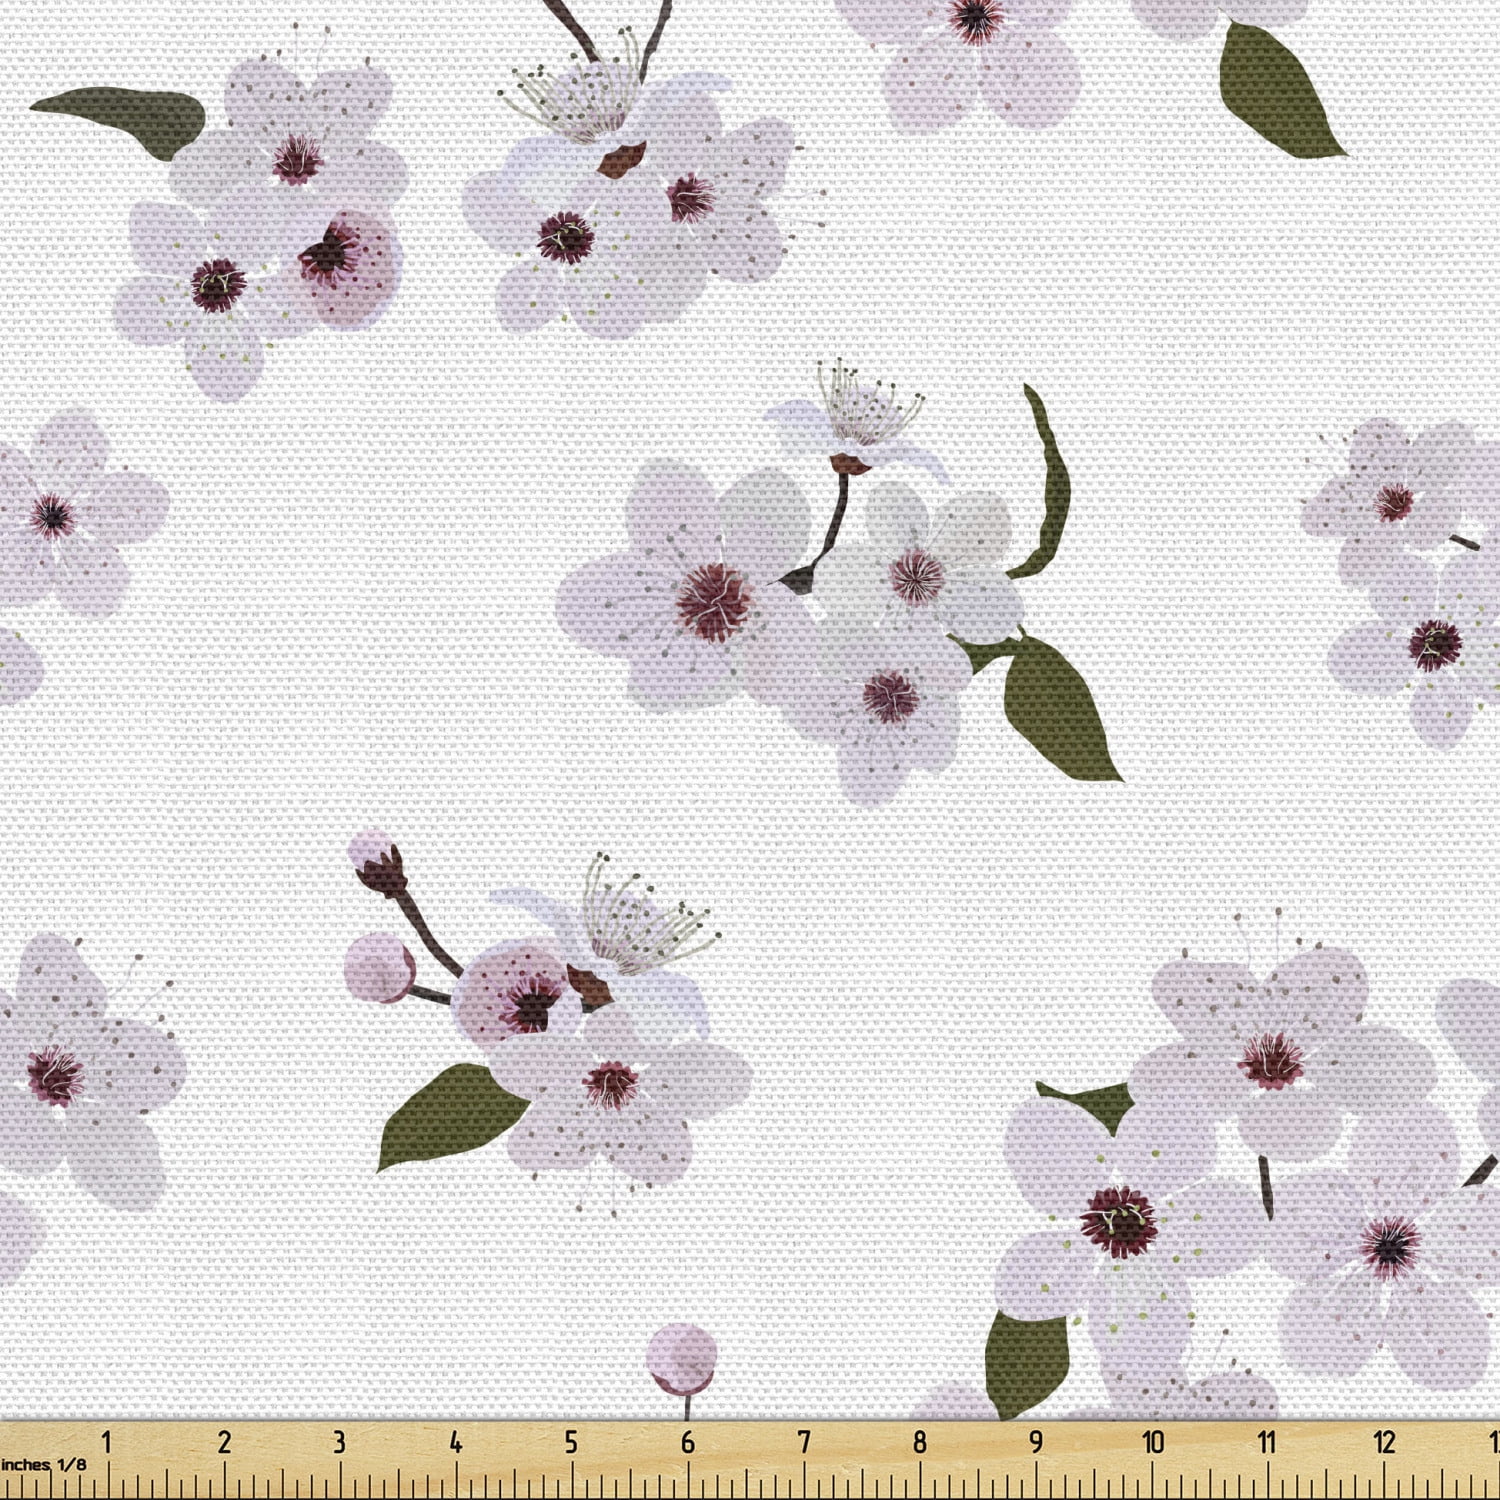 Almond Blossom Fabric by the Yard, Flower Pattern with Leaves Japanese Garden Design, Decorative Upholstery Fabric for Sofas and Home Accents, 2 Yards, Olive Green by Ambesonne - Walmart.com